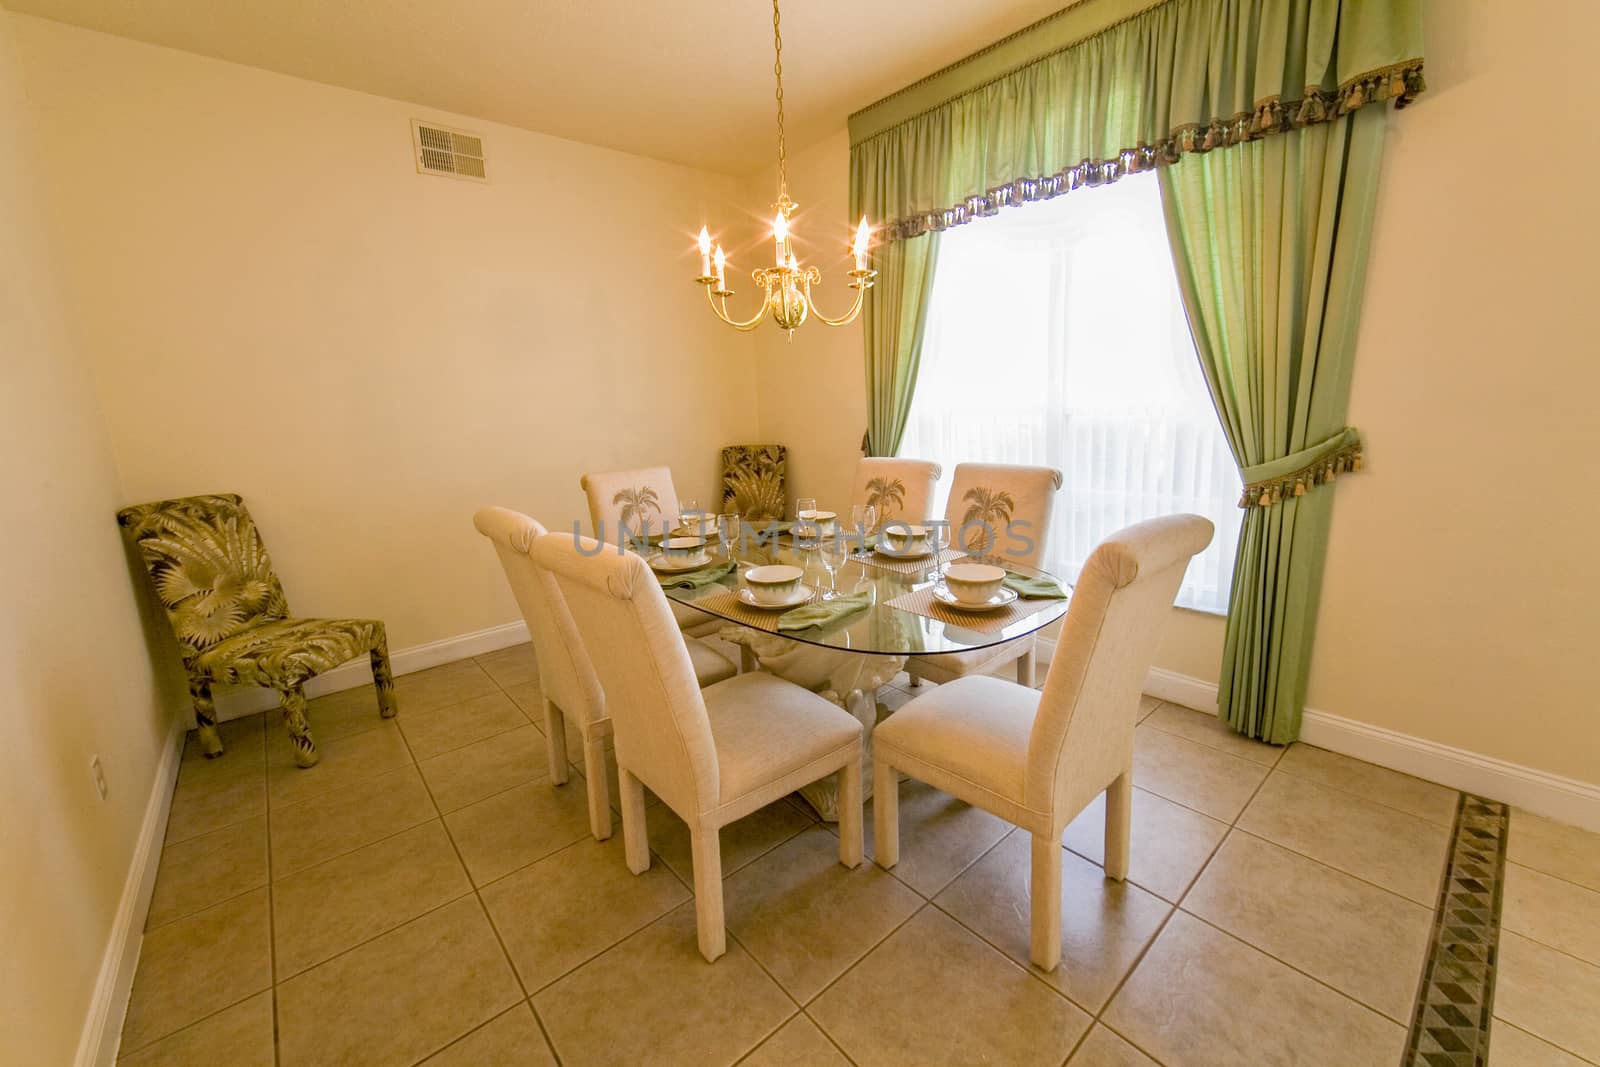 An interior photo of a dining room in a home